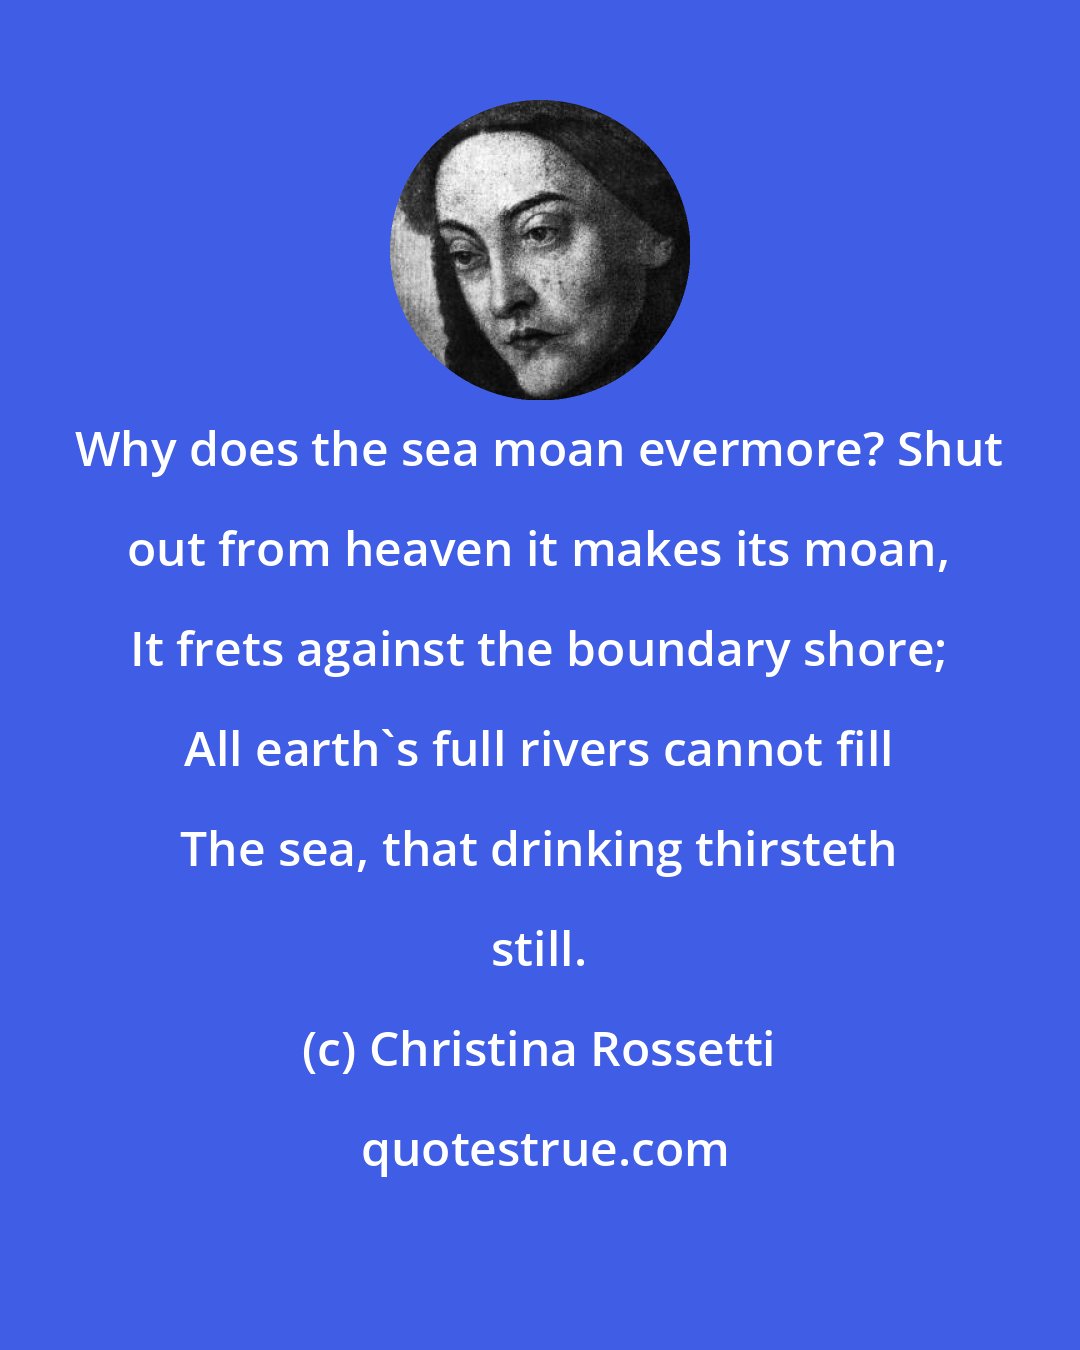 Christina Rossetti: Why does the sea moan evermore? Shut out from heaven it makes its moan, It frets against the boundary shore; All earth's full rivers cannot fill The sea, that drinking thirsteth still.